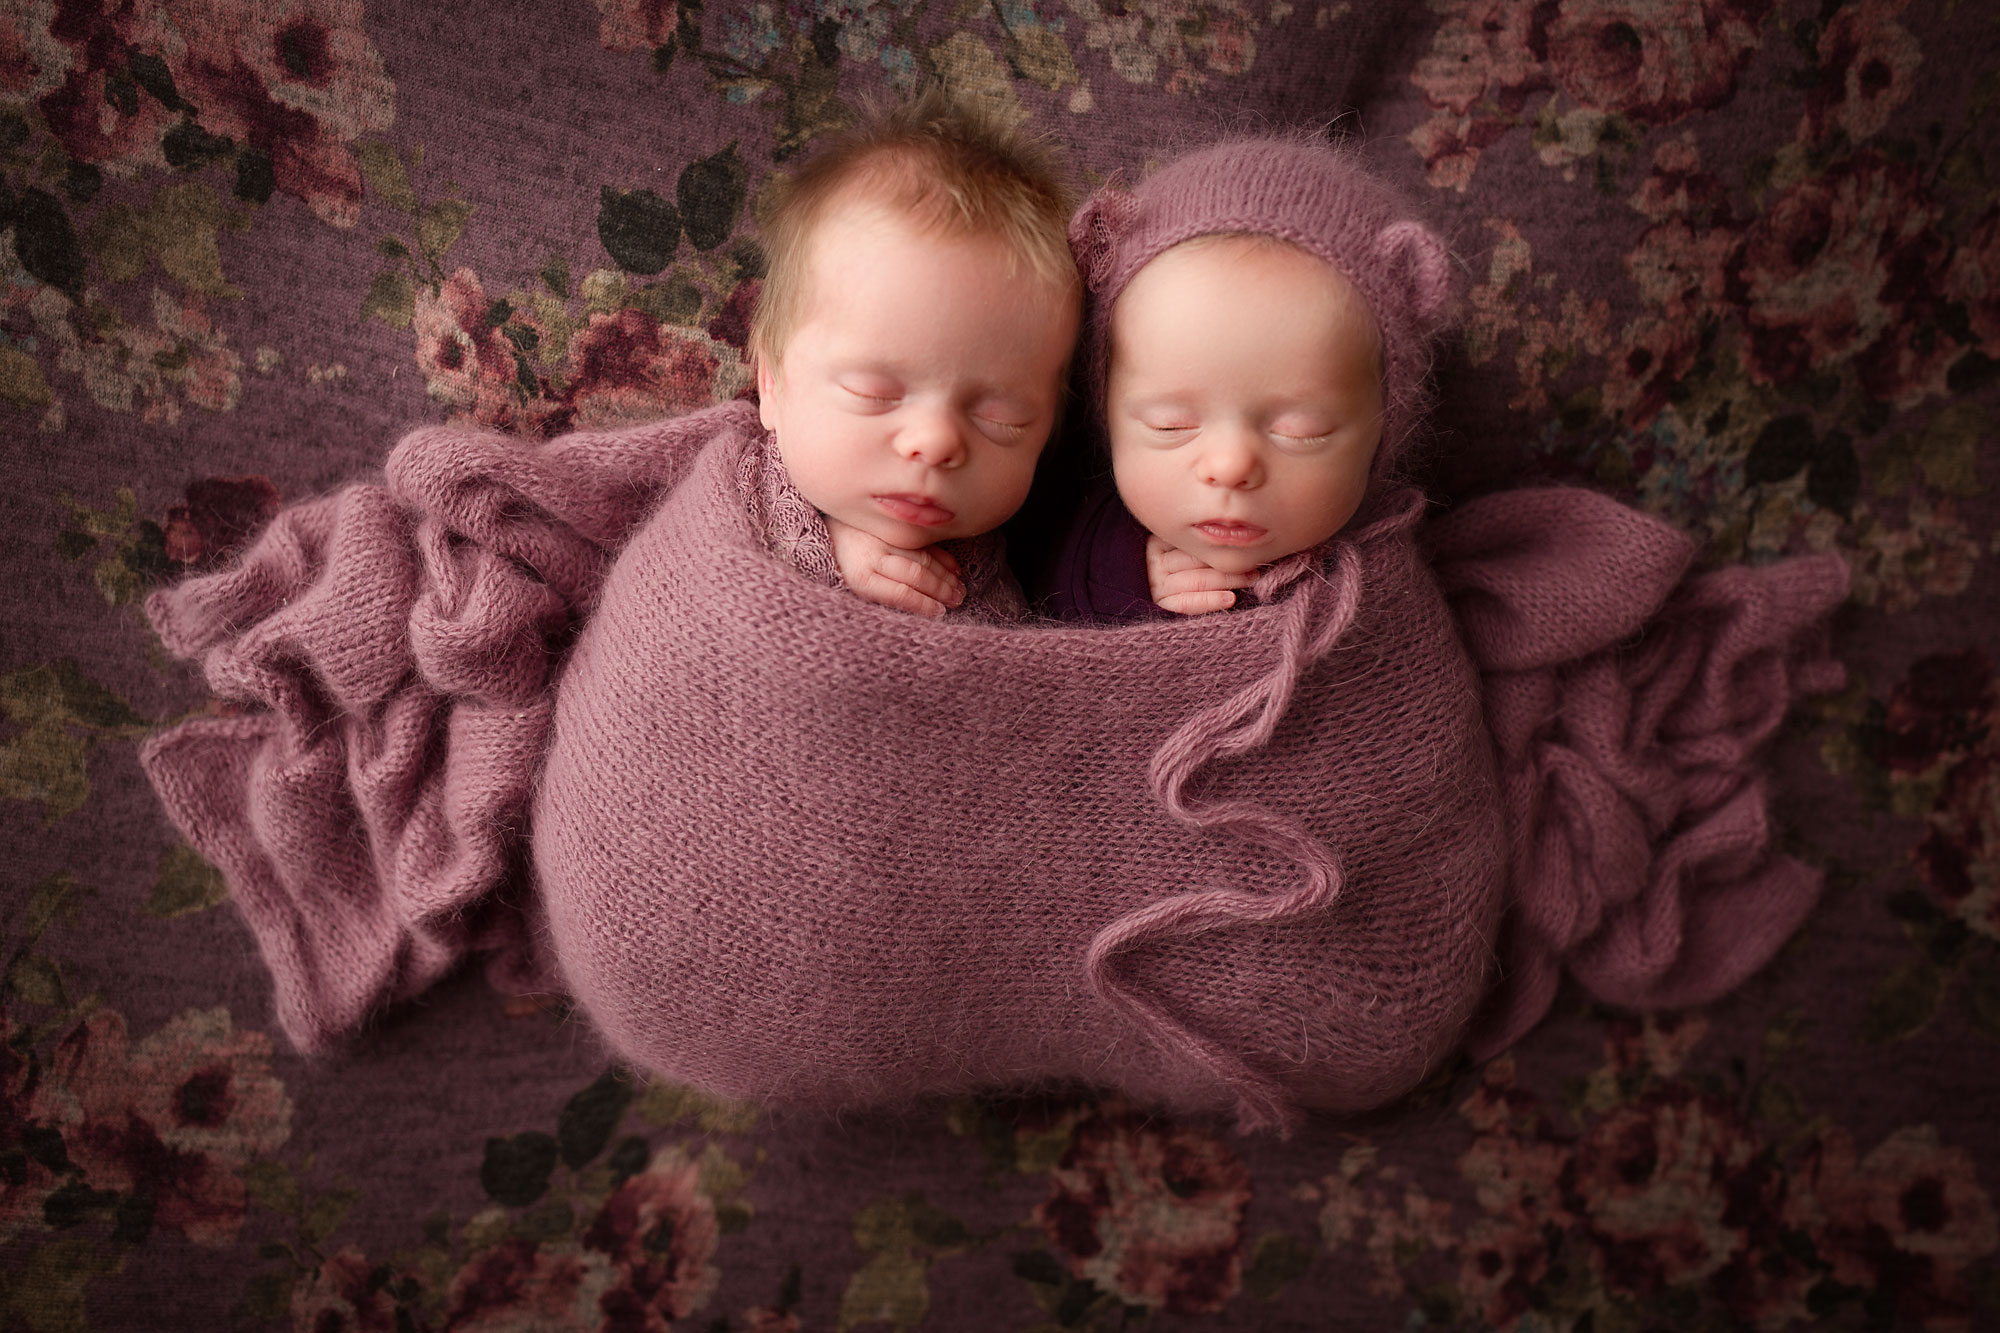 twins photography near me, twin girls in purple wrap against purple floral background